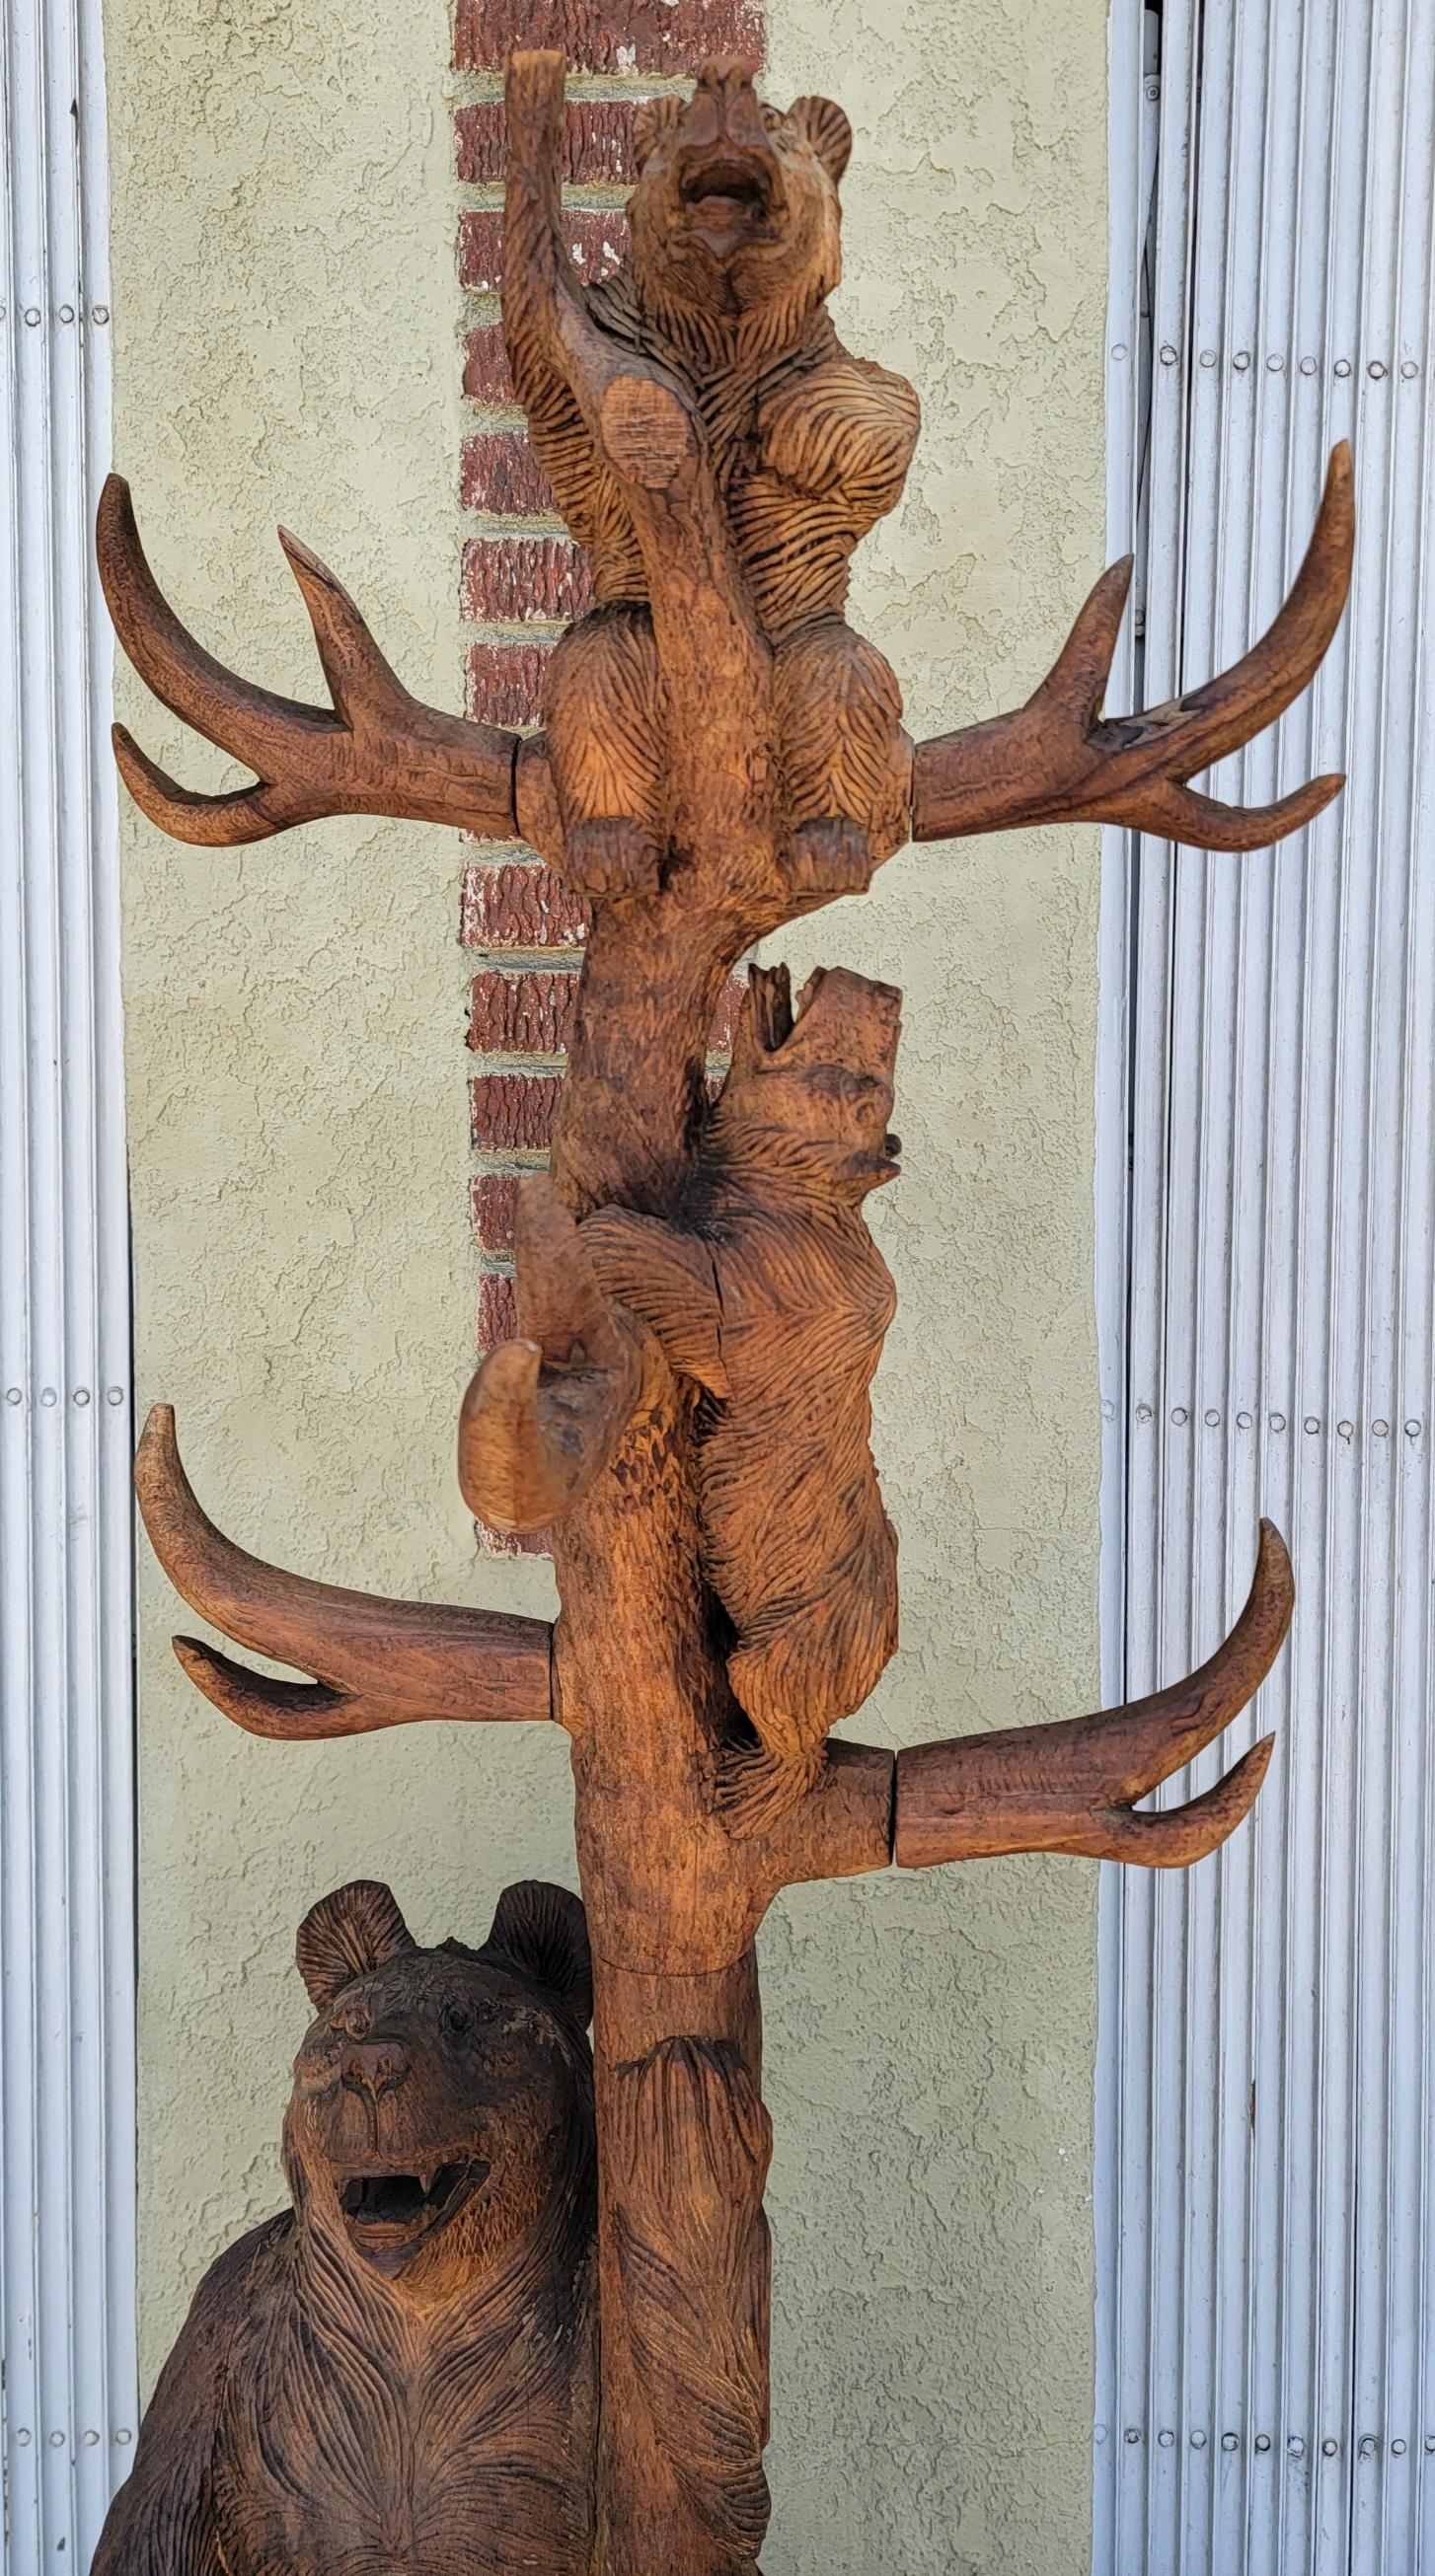 This rustic hand carved hat and coat tree with carved momma bear and baby cubs climbing up the tree. The condition is very good with wear and tear consistent from age and use. The base is on four hand carved feet and has a place for the umbrellas at